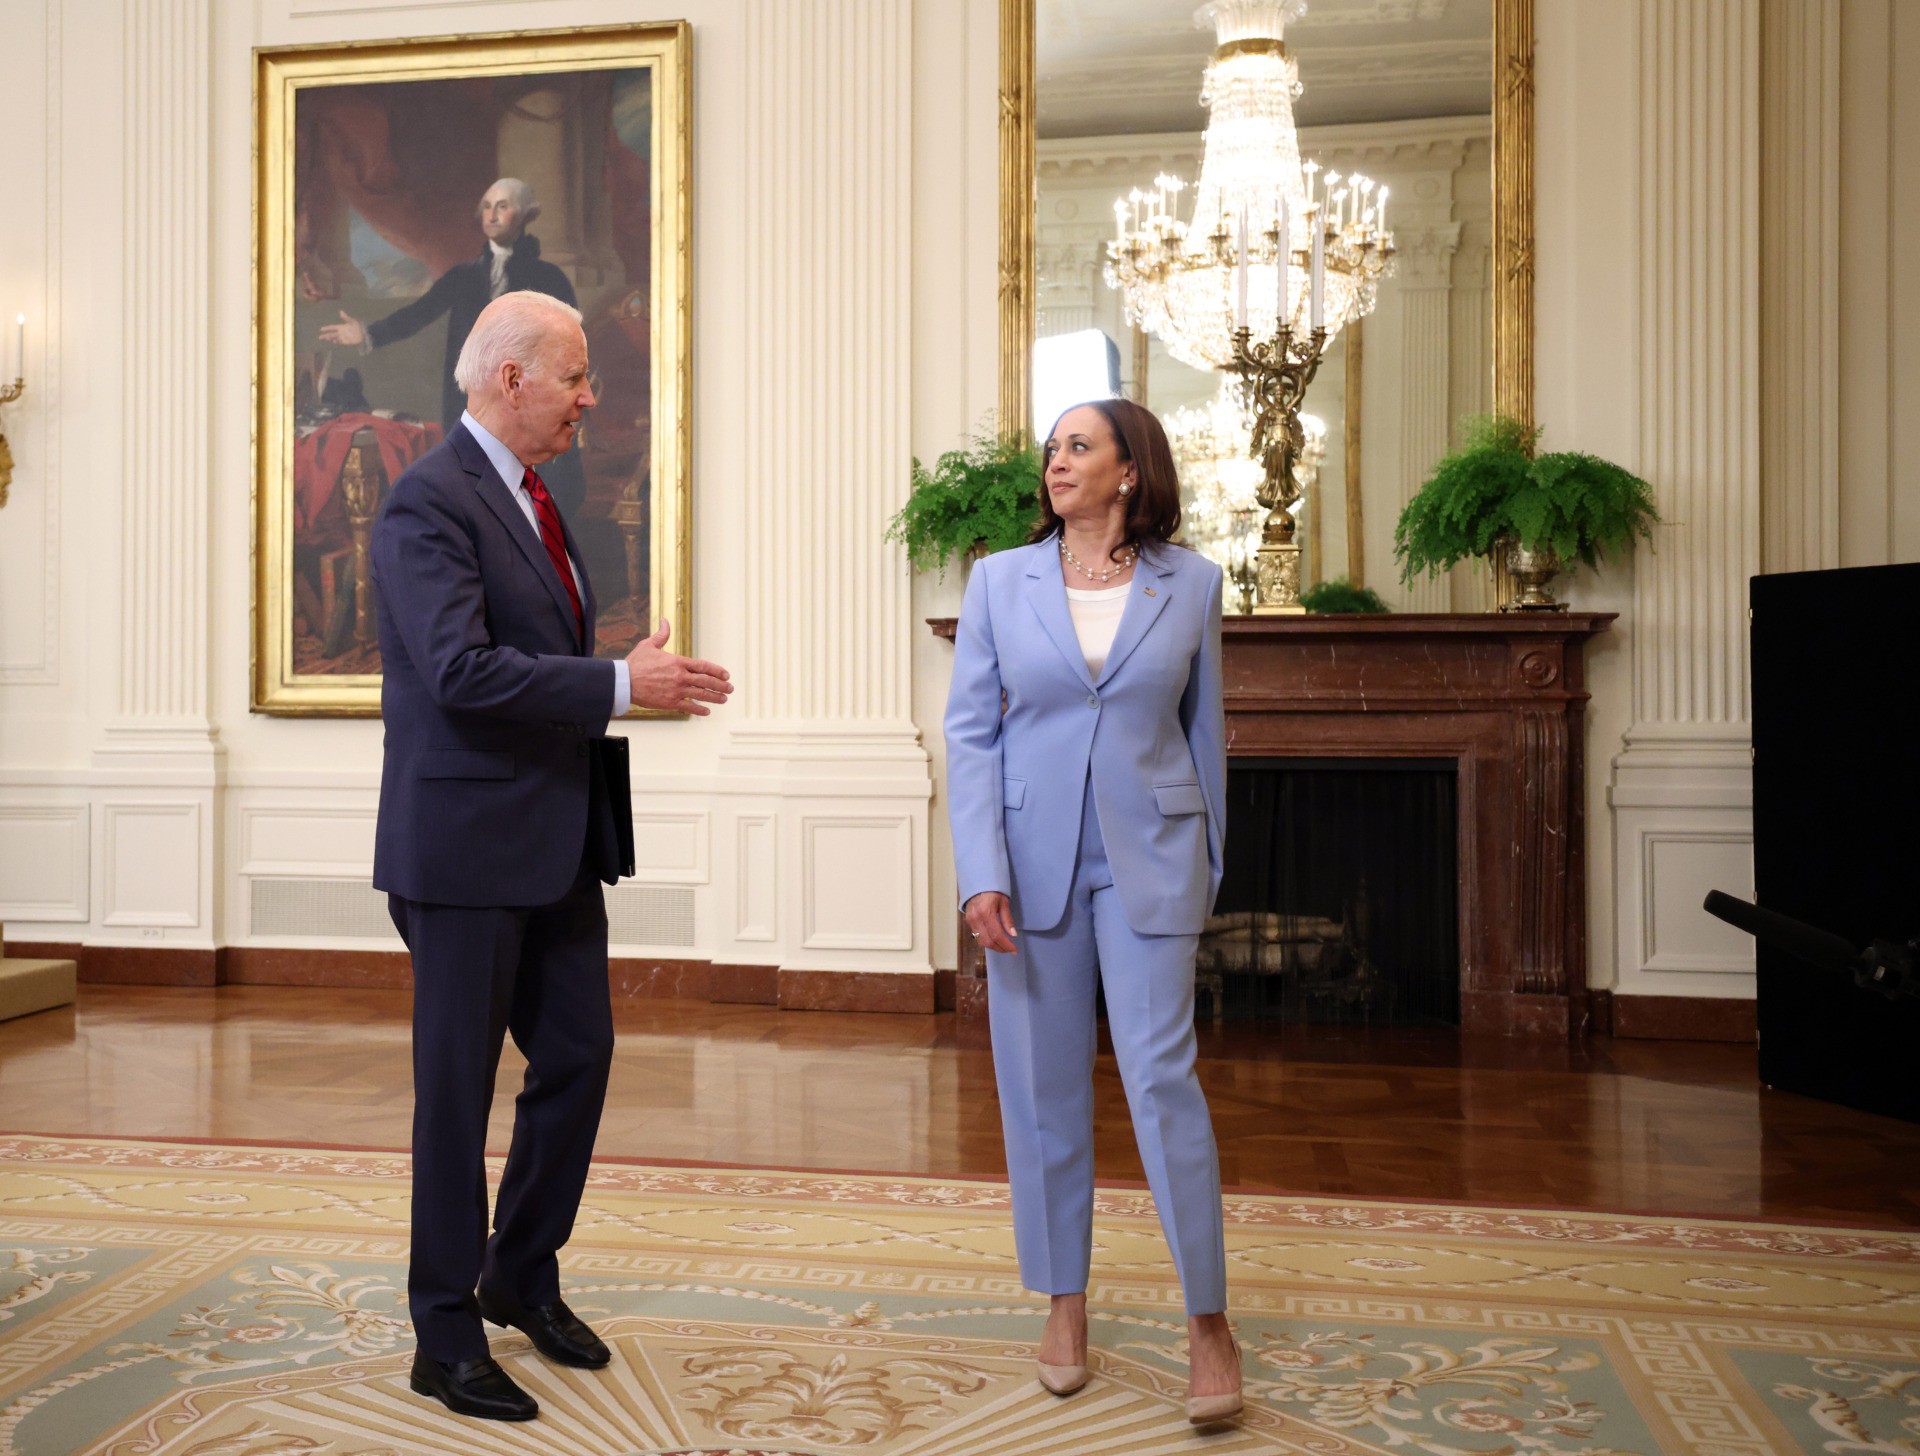 U.S. President Joe Biden talks to Vice President Kamala Harris after delivering remarks on the Senate's bipartisan infrastructure deal at the White House on June 24, 2021 in Washington, DC. Biden said both sides made compromises on the nearly $1 trillion infrastructure bill (Photo by Kevin Dietsch/Getty Images)